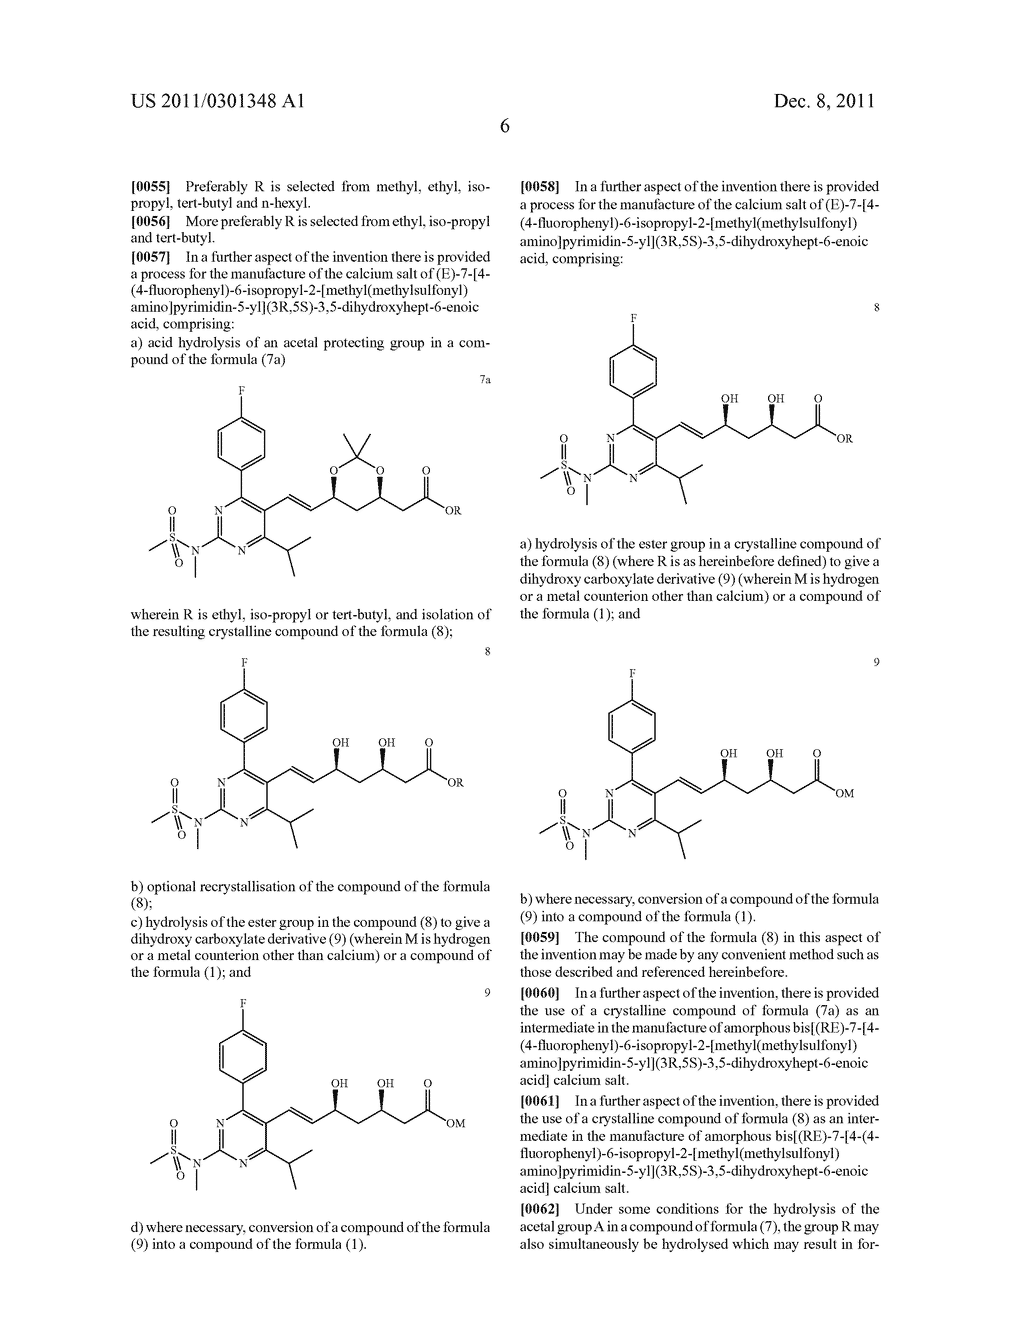 Process for the Manufacture of the Calcium Salt of Rosuvastatin     (E)-7-[4-(4-Fluorophenyl)-6-Isopropyl-2-[Methyl(Methylsulfonyl)Amino]-Pyr-    imidin-5-yl](3R,5S)-3,5-Dihydroxyhept-6-Enoic Acid and Crystalline     Intermediates Thereof - diagram, schematic, and image 15